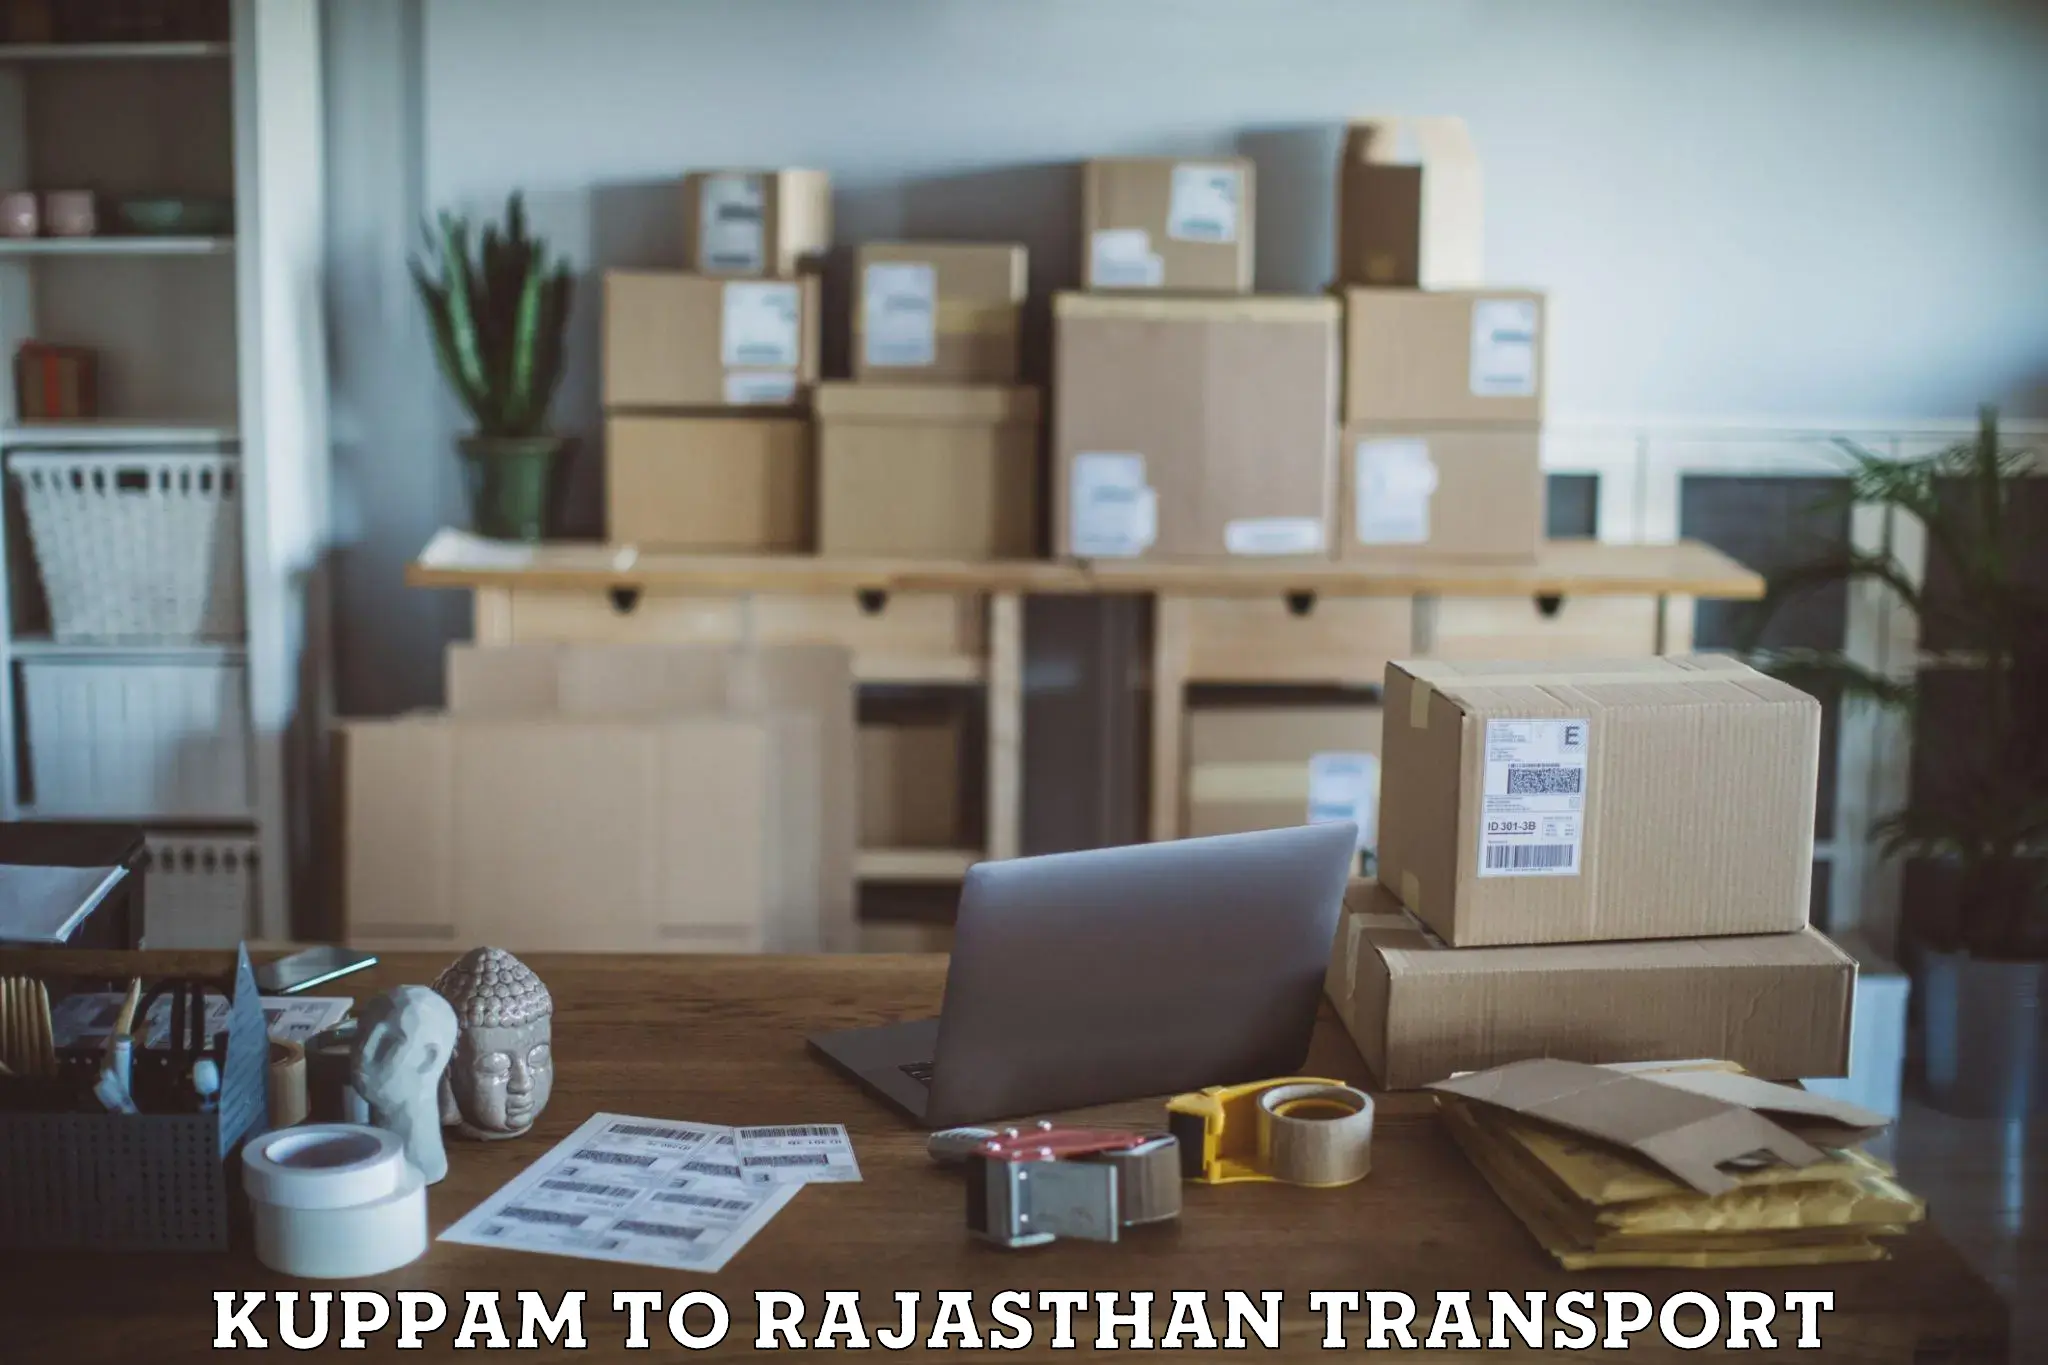 Truck transport companies in India Kuppam to Renwal